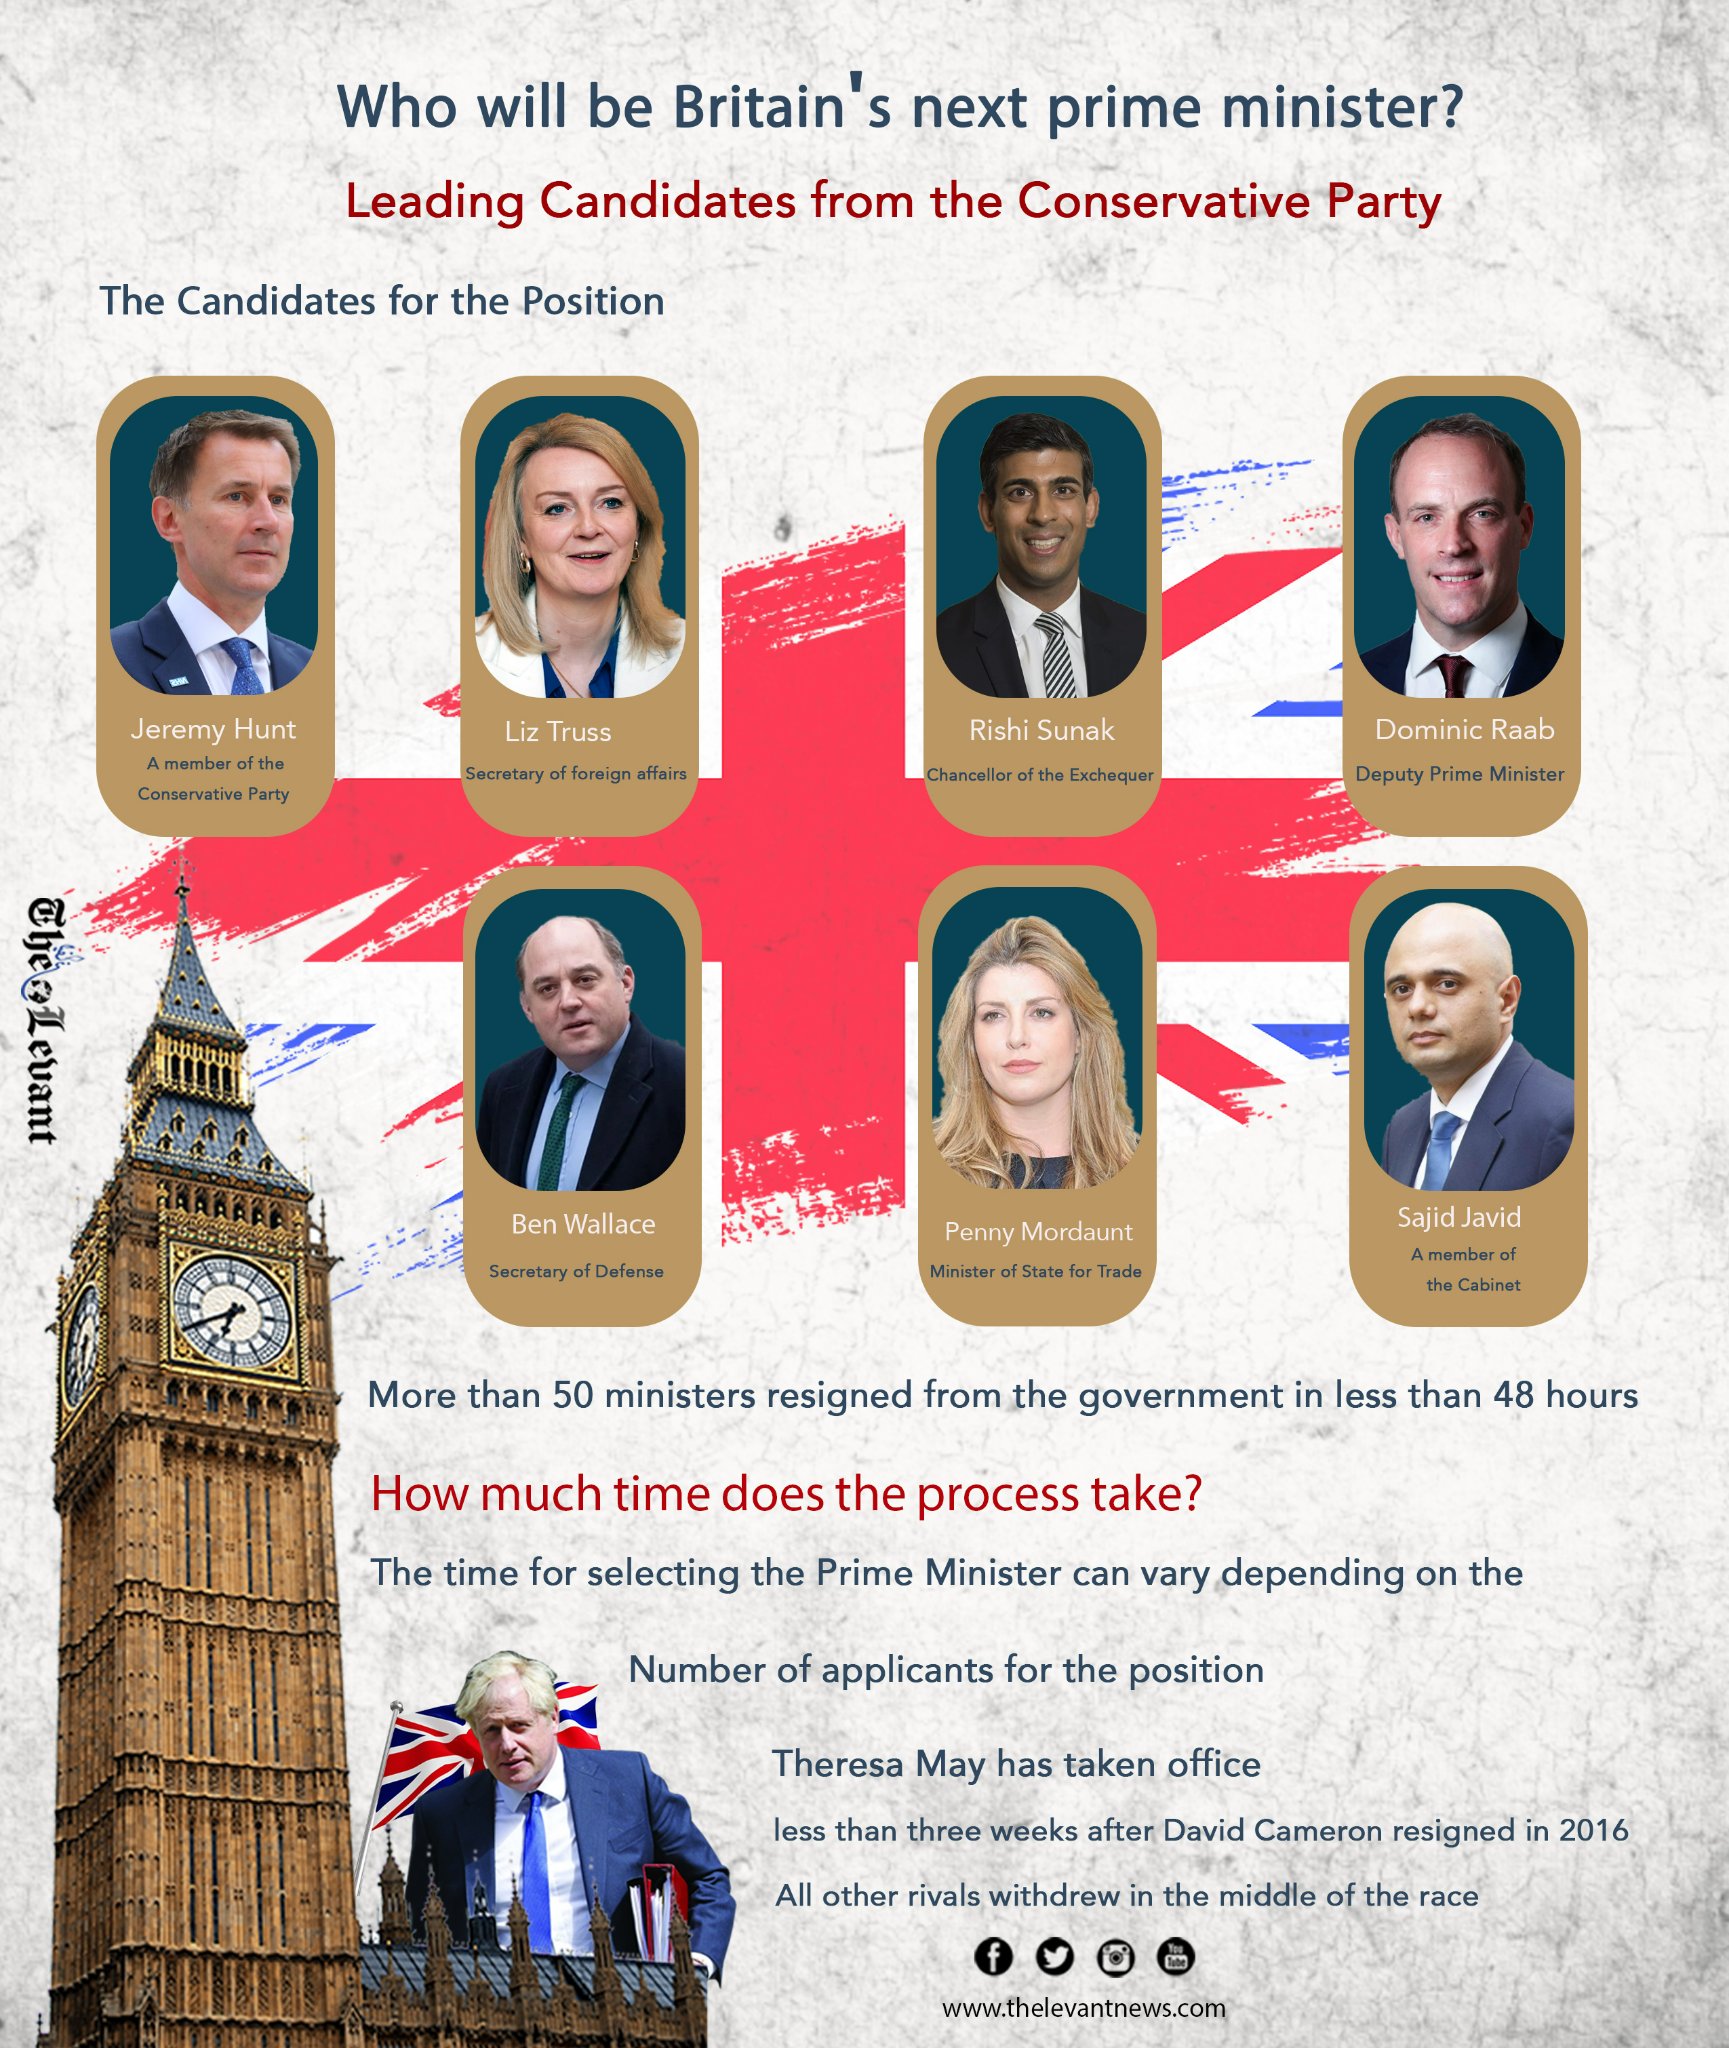 Who will be Britain's next prime minister?